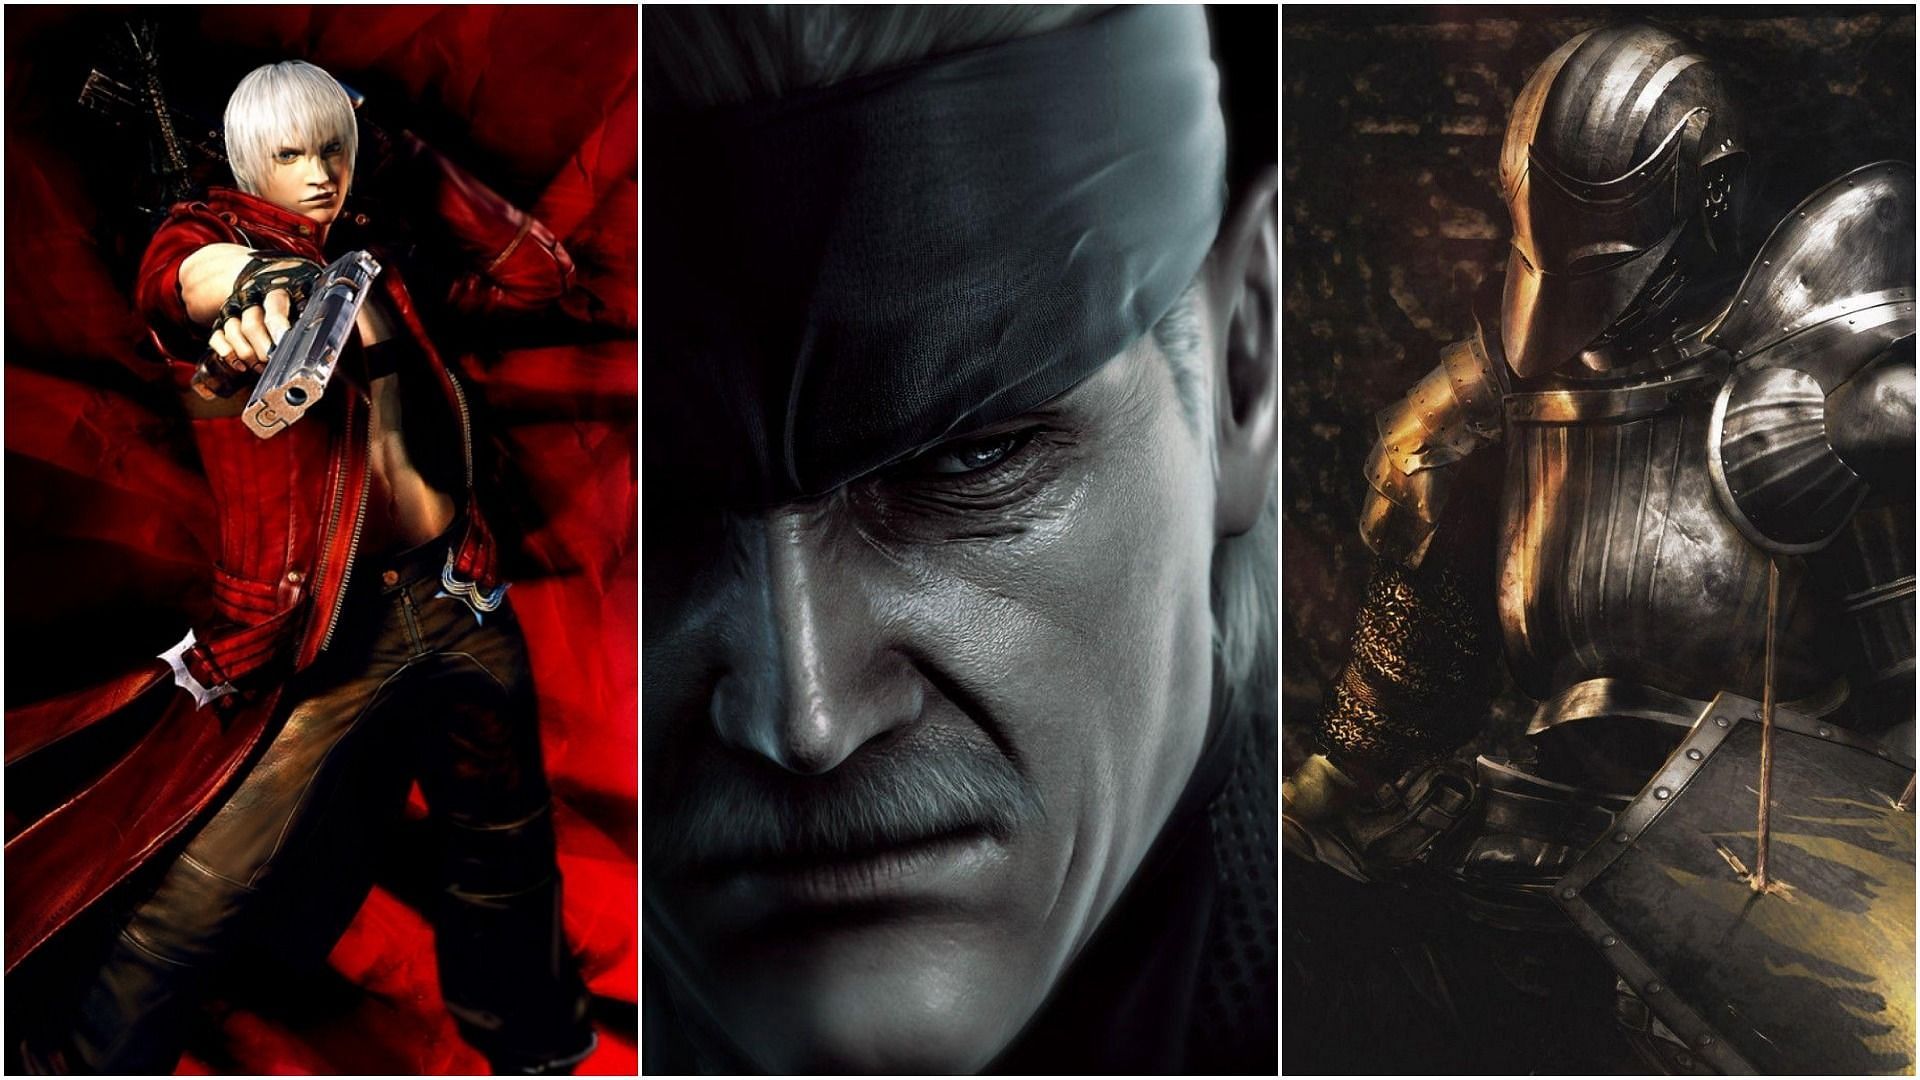 Some of the best PS3 games available and missing on PlayStation Plus (Image via Capcom, Konami, and Bandai Namco)